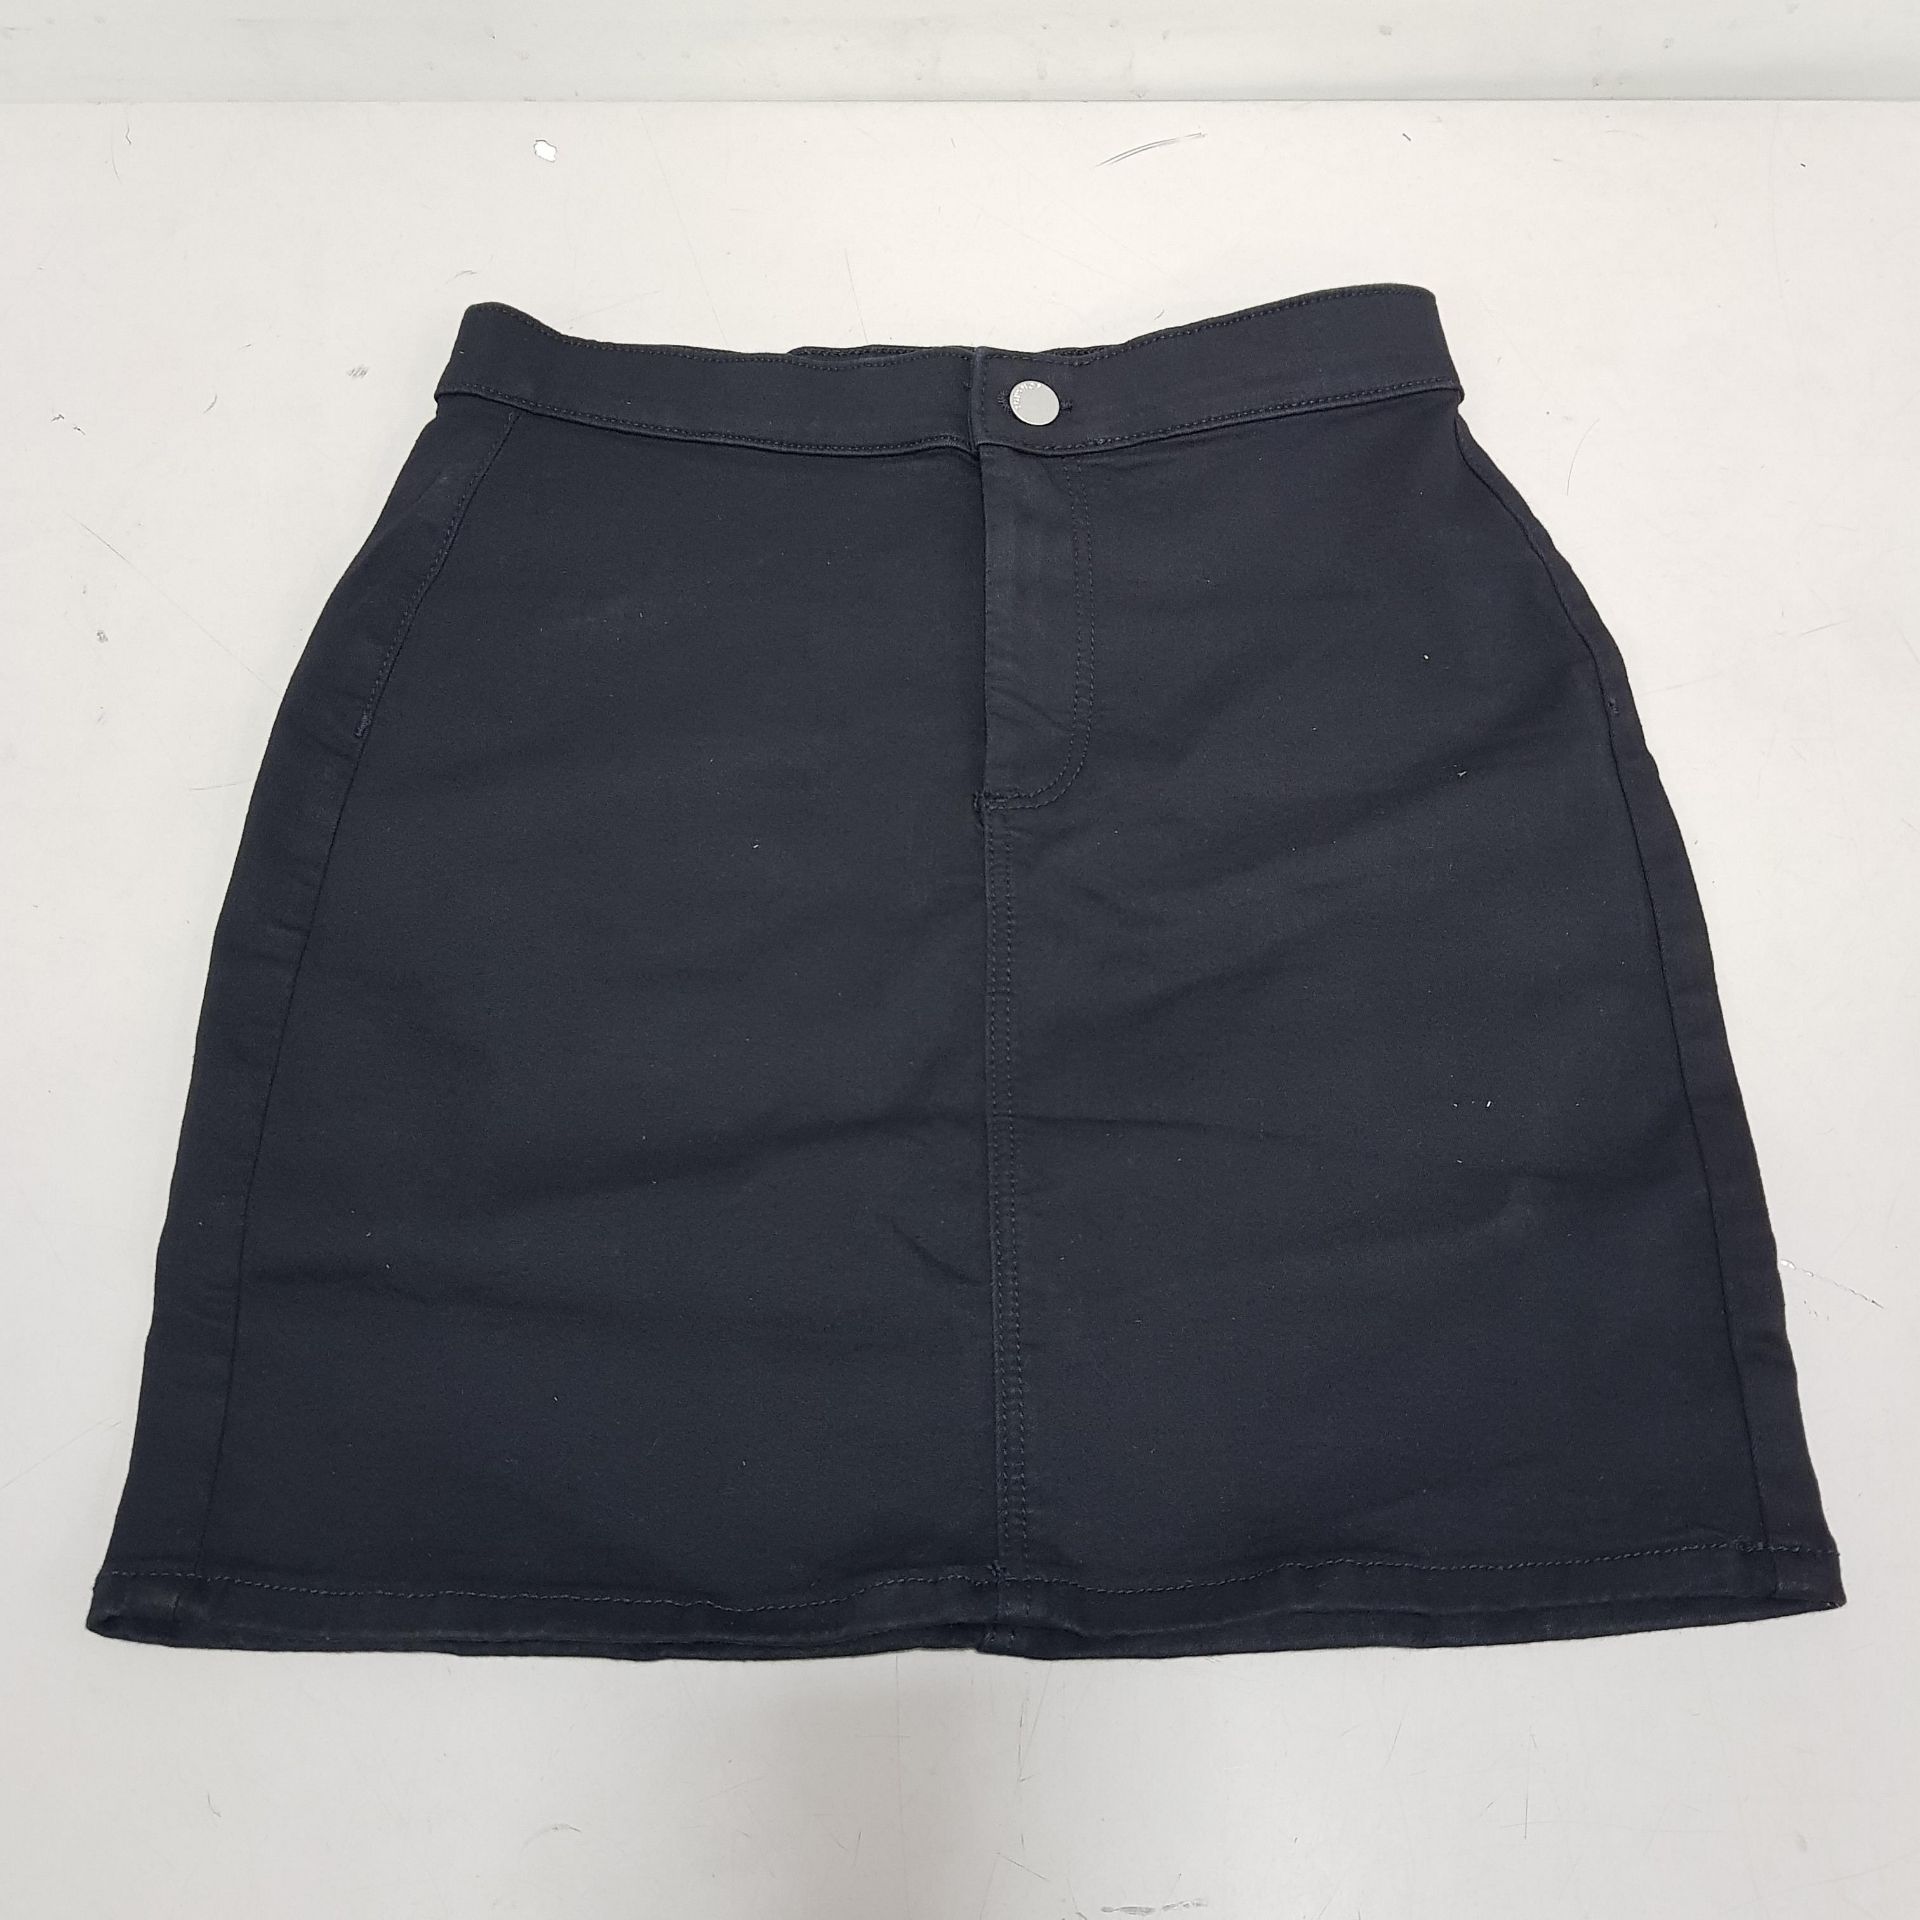 30 X BRAND NEW TOPSHOP BLACK DENIM SKIRTS IN SIZE UK 12 RRP-£25.00PP TOTAL RRP-£750.00